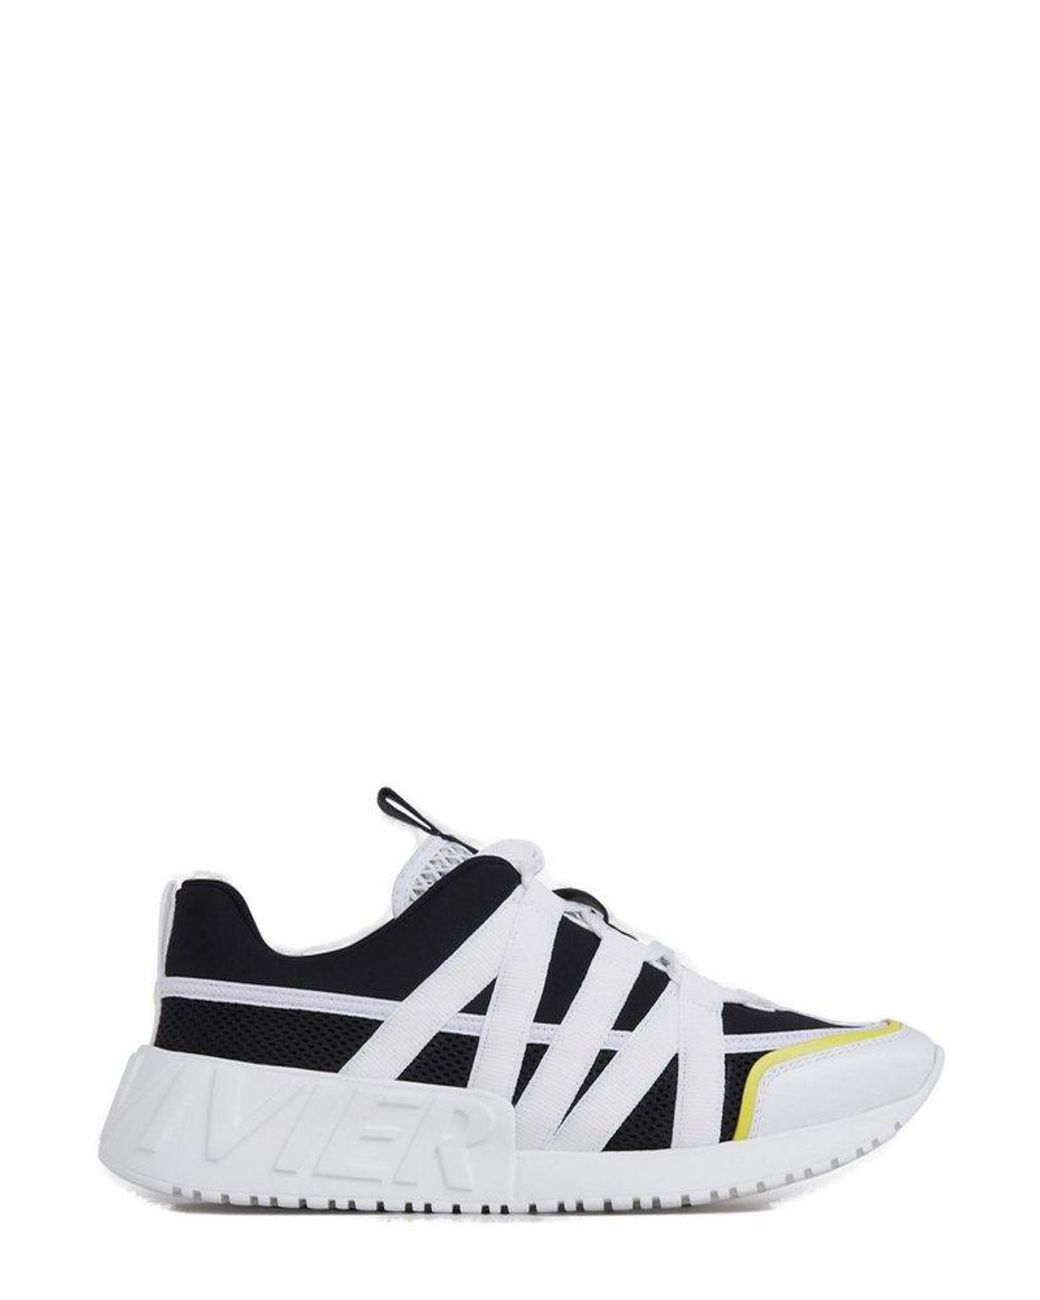 Roger Vivier Logo Tape Lace-up Sneakers in Black | Lyst